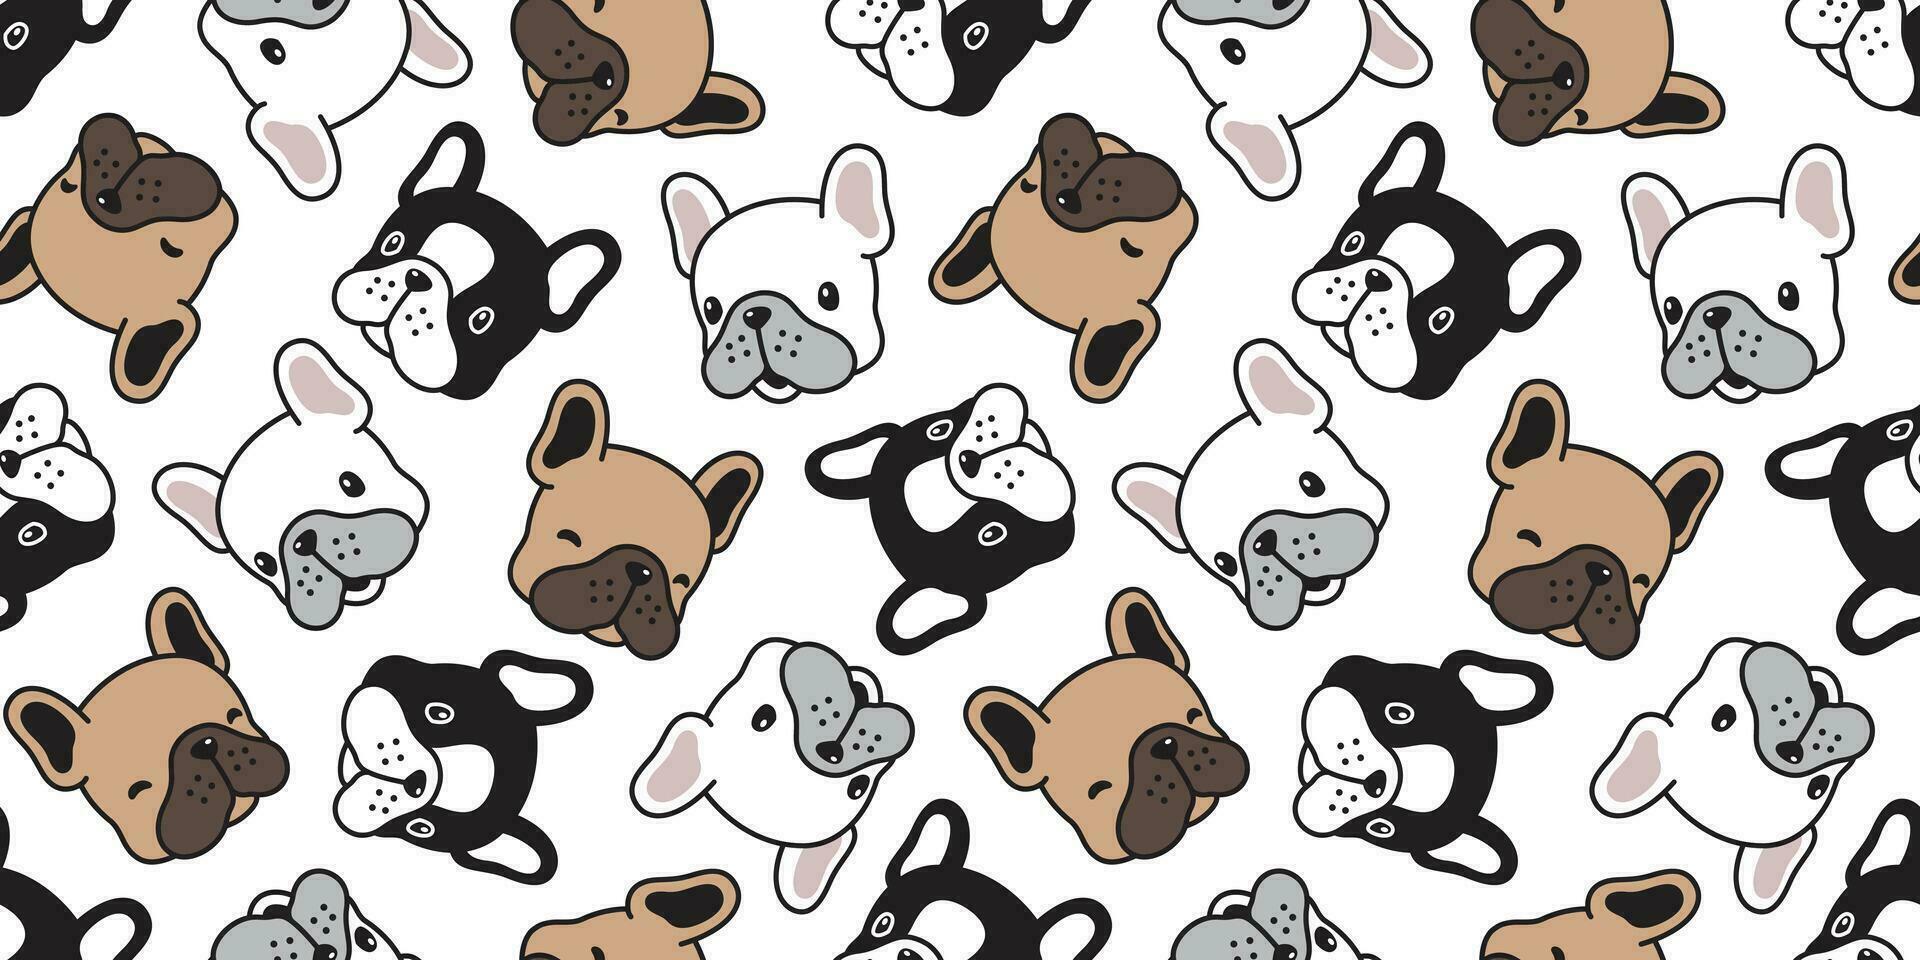 Dog seamless pattern french bulldog vector scarf isolated head puppy cartoon tile background repeat wallpaper illustration